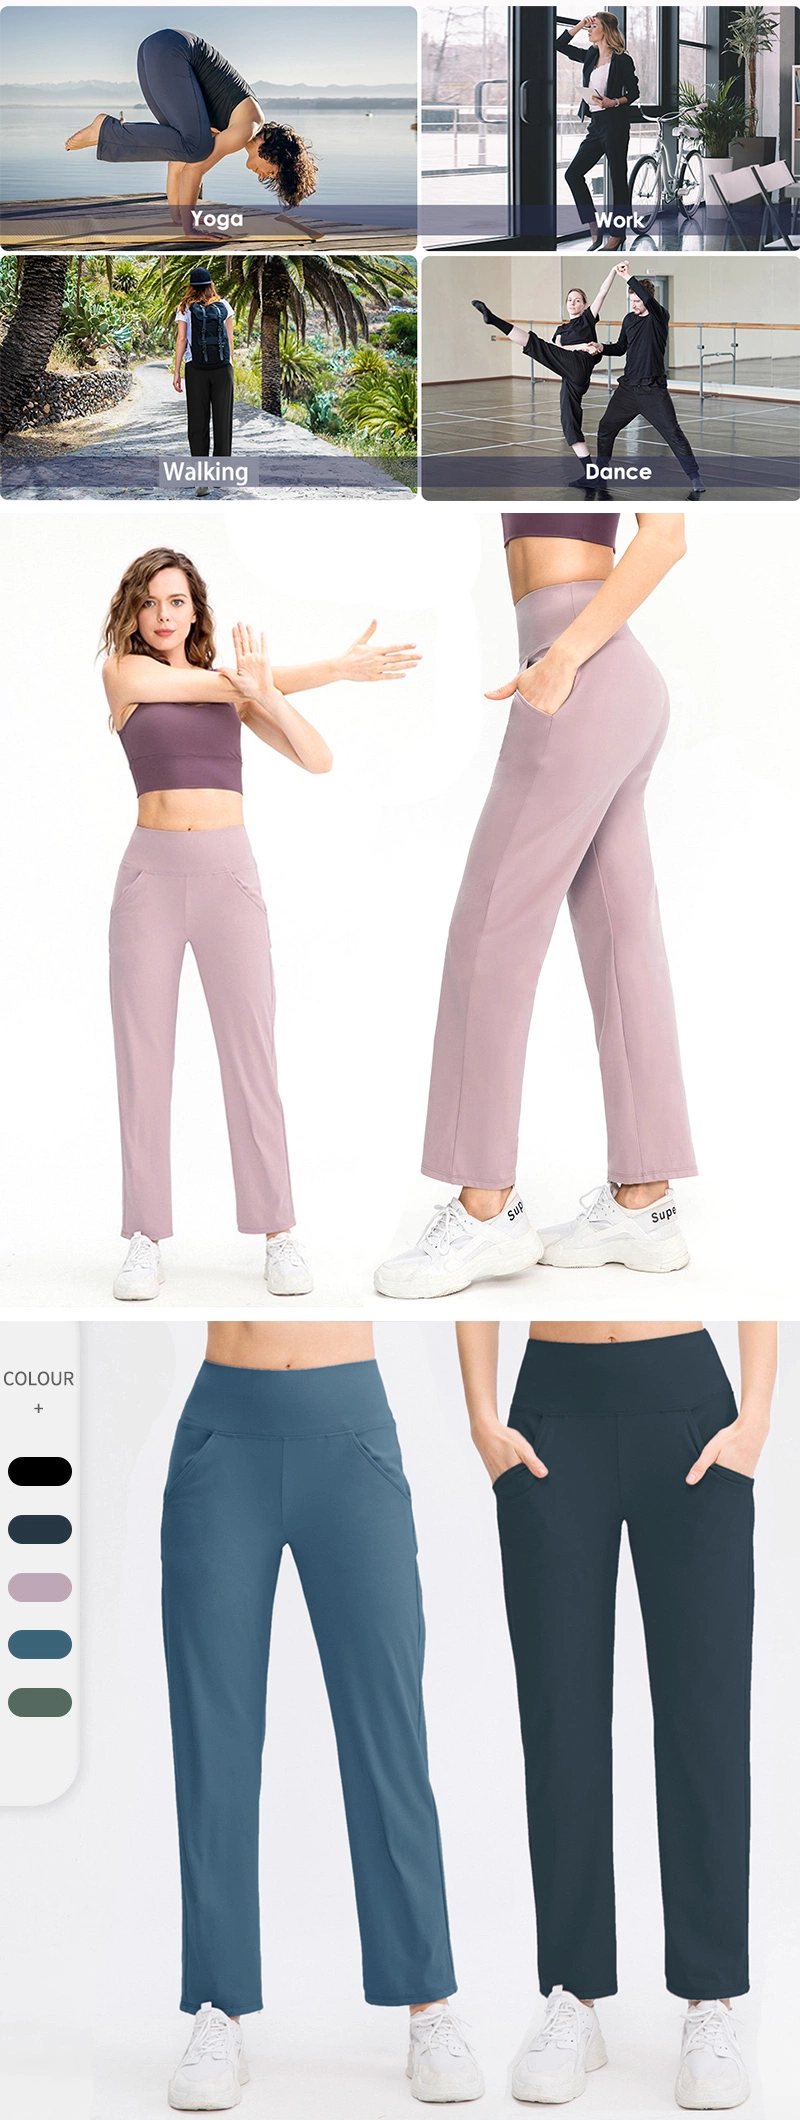 Factory Wholesale High Quality Casual Street Outfits Sports Pants for Women, Custom Premium Soft Wide Leg Yoga Pants with Pockets Leisure Loose Fitness Trousers